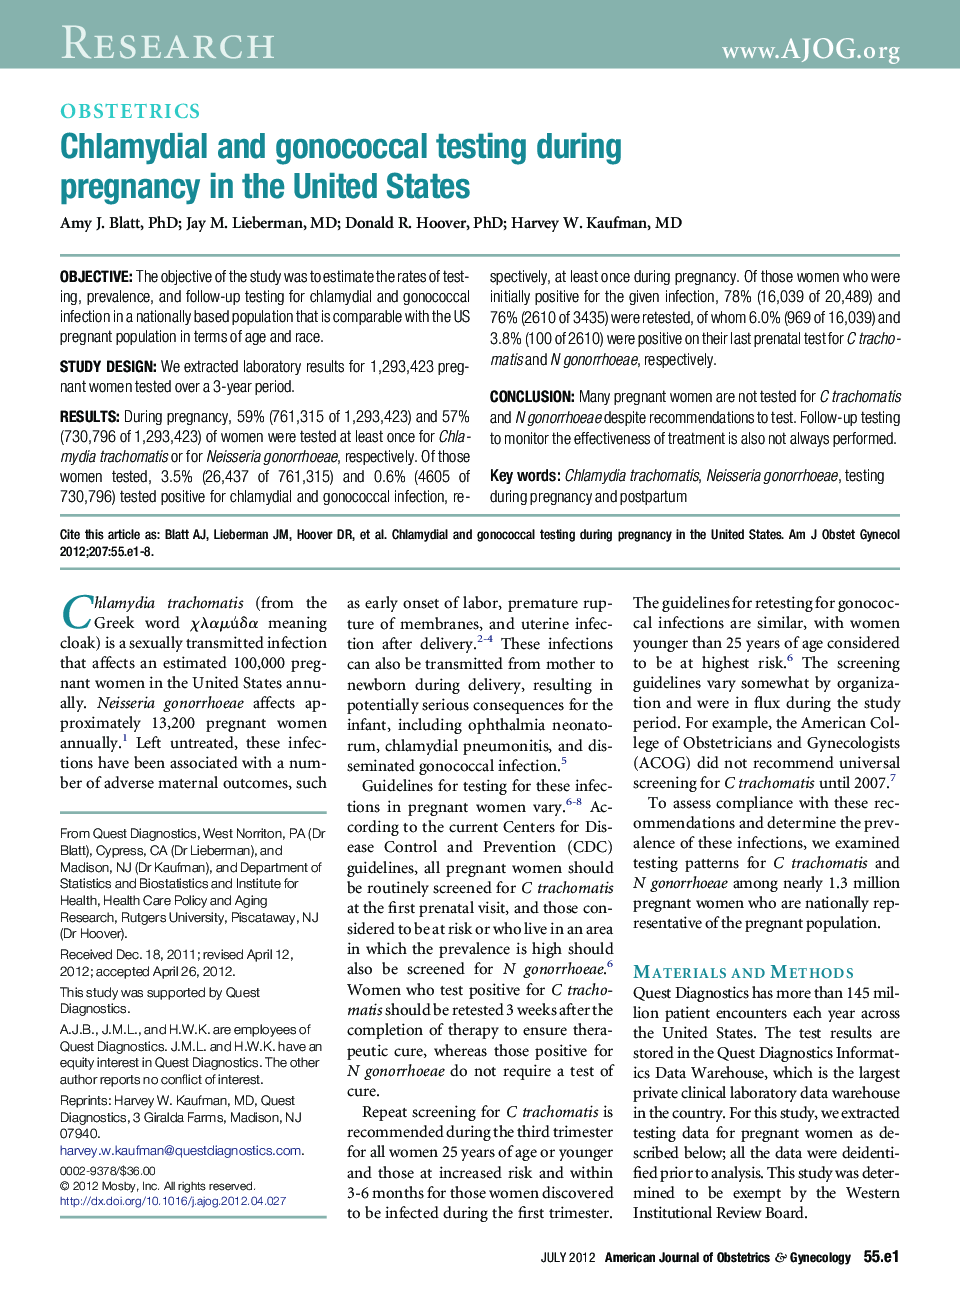 Chlamydial and gonococcal testing during pregnancy in the United States